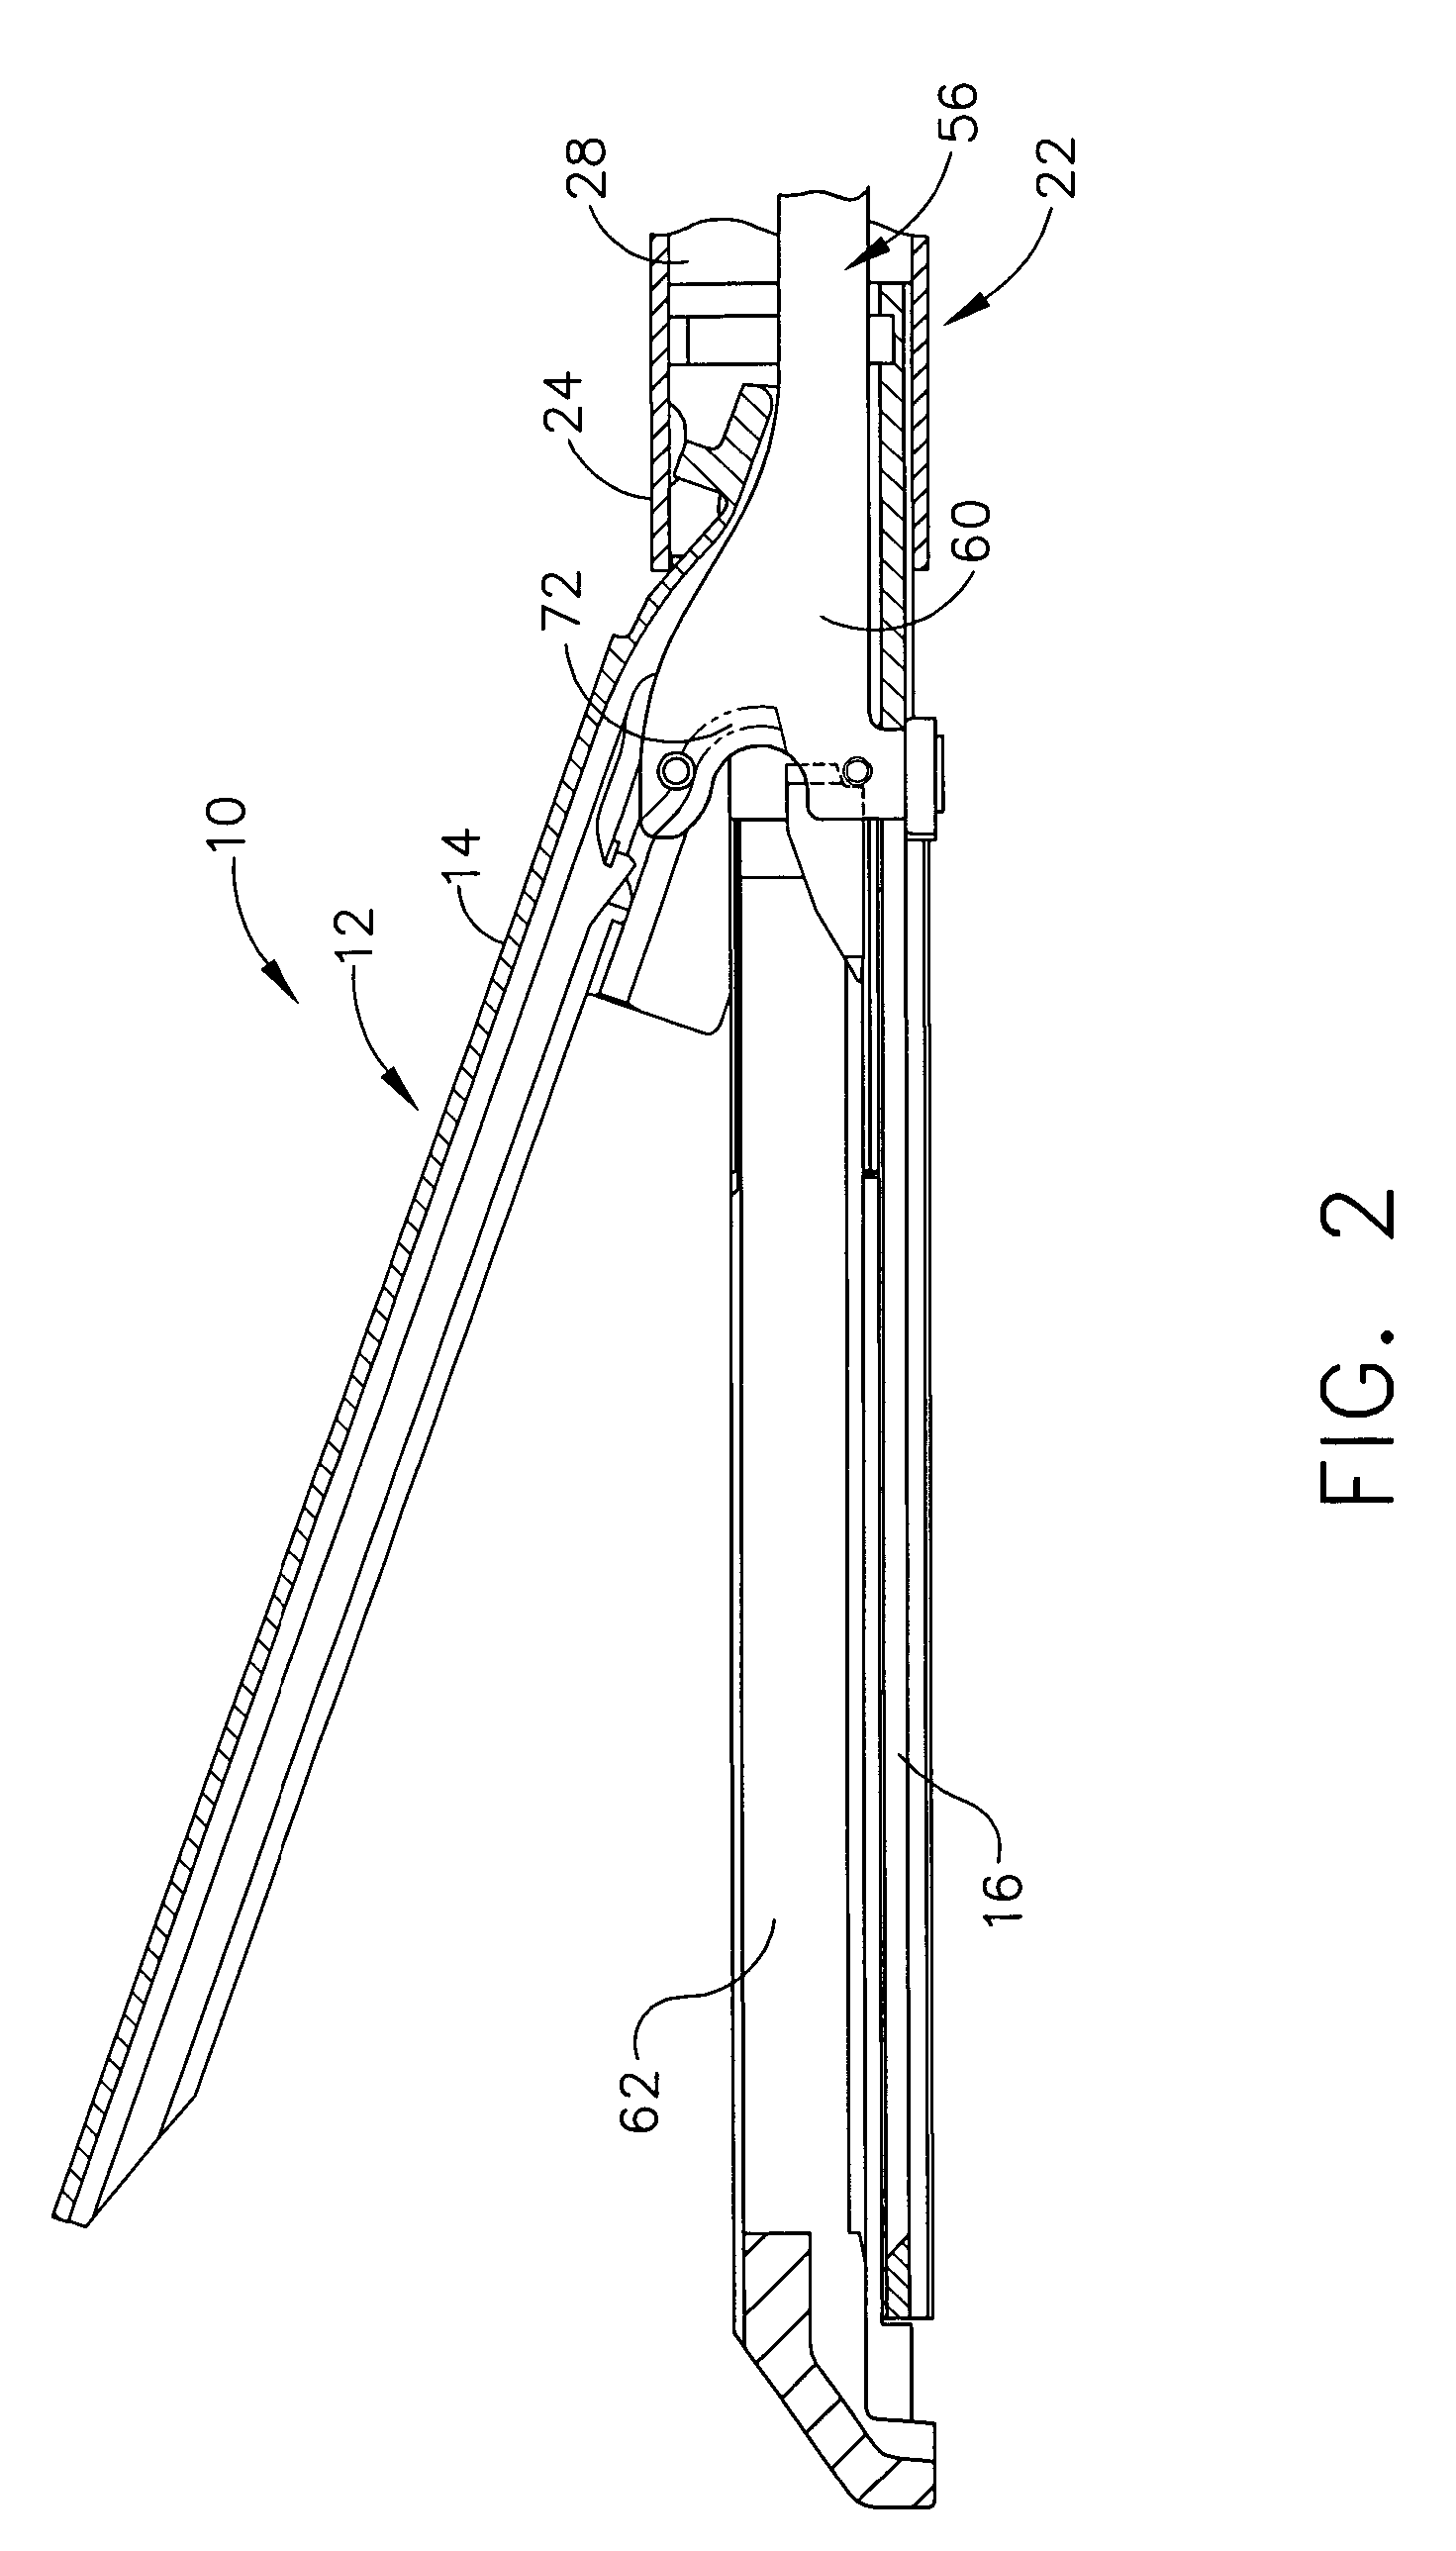 Surgical stapling instrument incorporating a multistroke firing mechanism having a rotary transmission